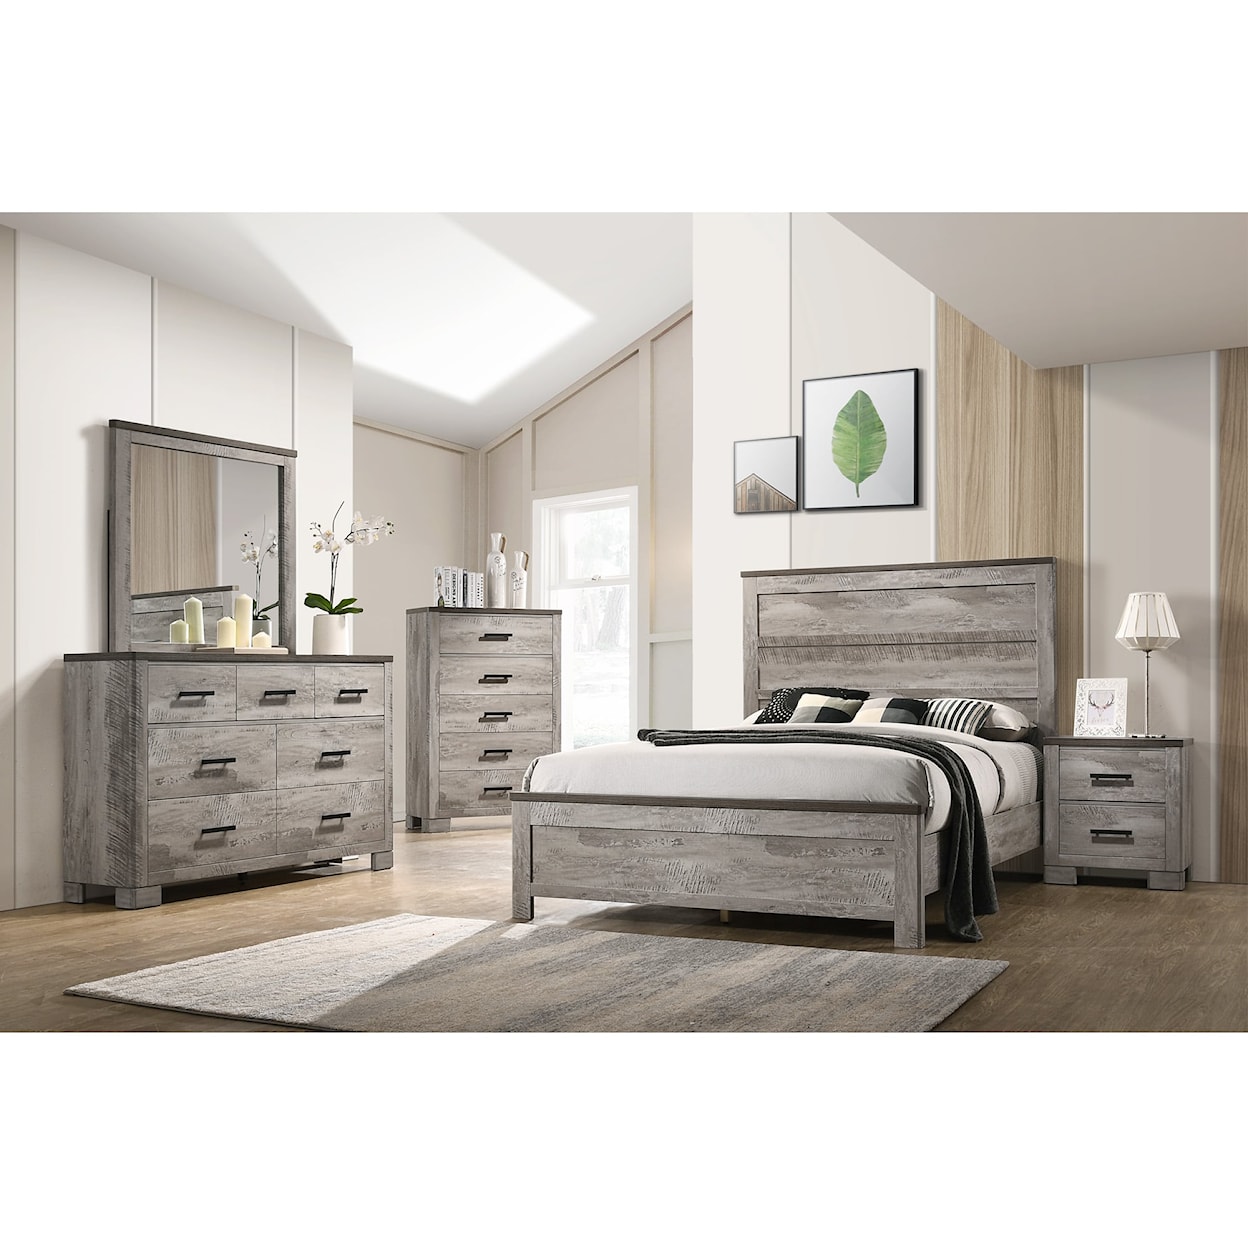 Elements International Millers Cove- Millers Cove Full 4PC Bedroom Set